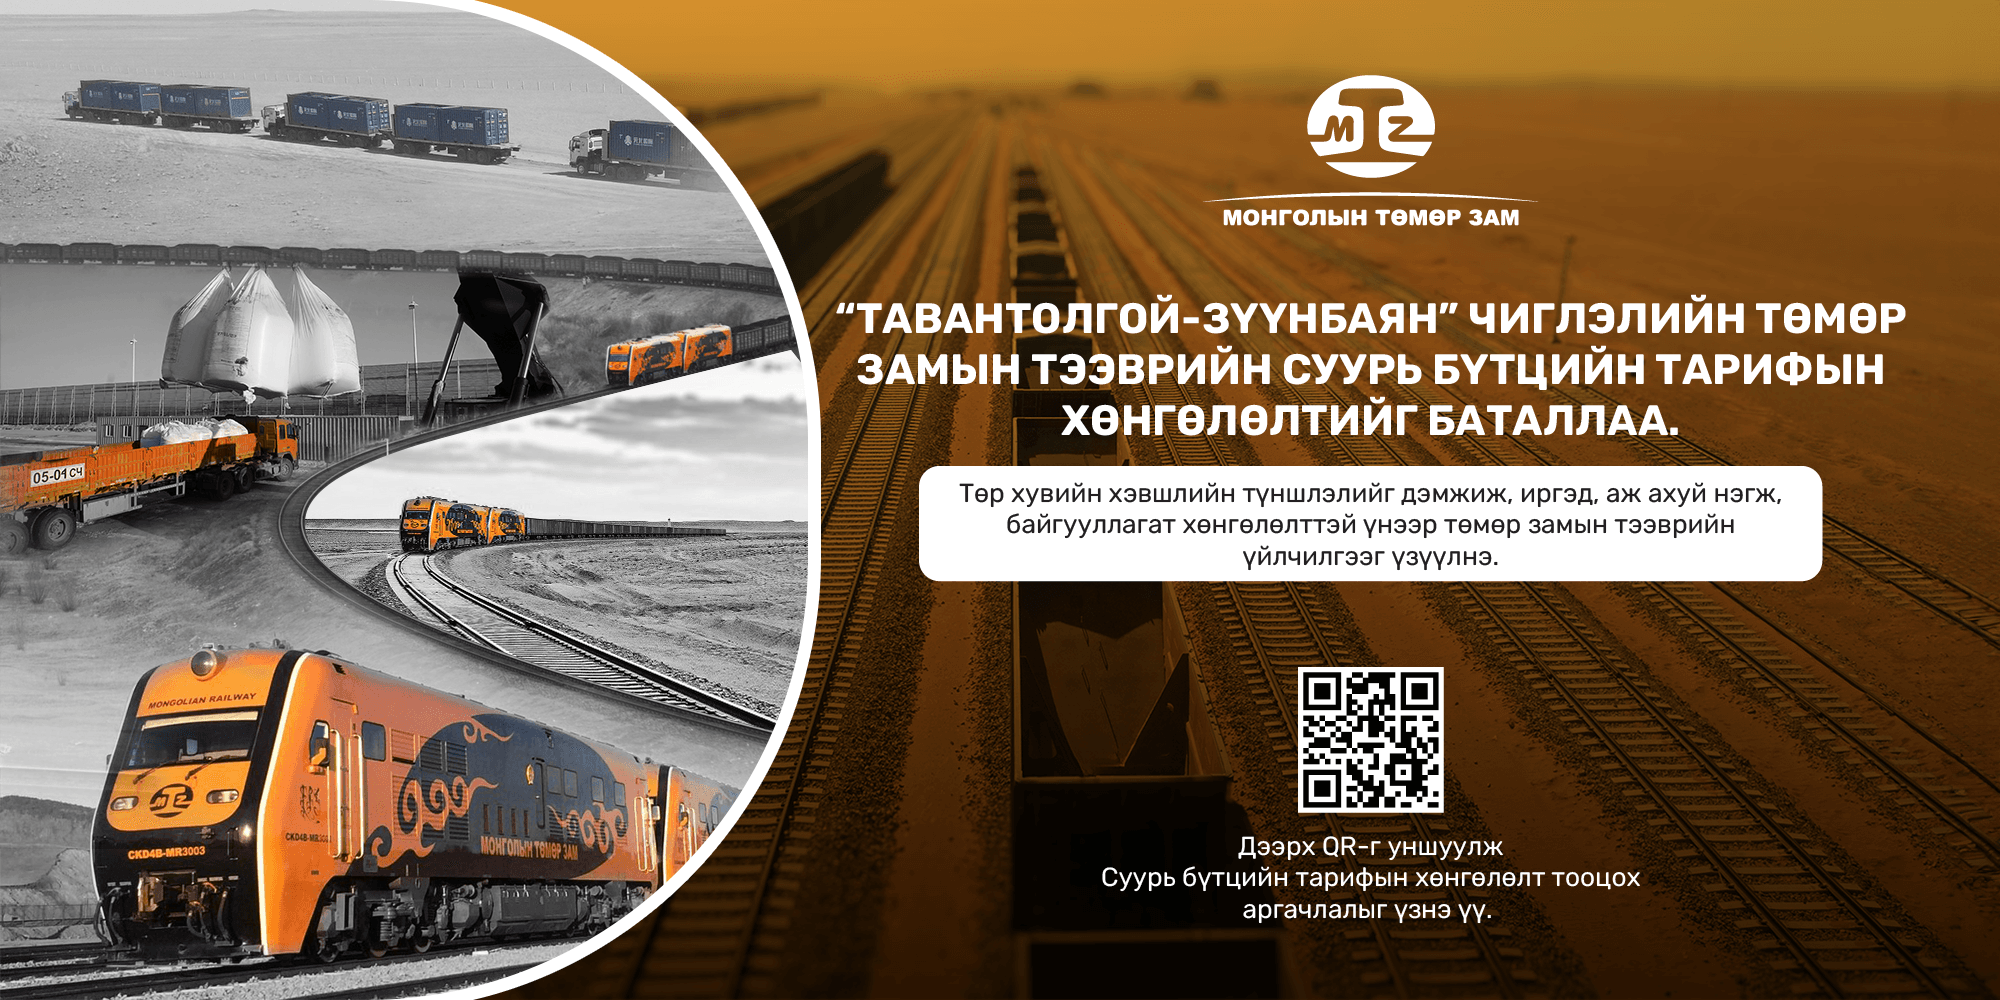 TARIFF DISCOUNTS HAVE BEEN APPROVED FOR THE TAVANTOLGOI-ZUUNBAYAN DIRECTION RAILWAY INFRASTRUCTURE PROJECT